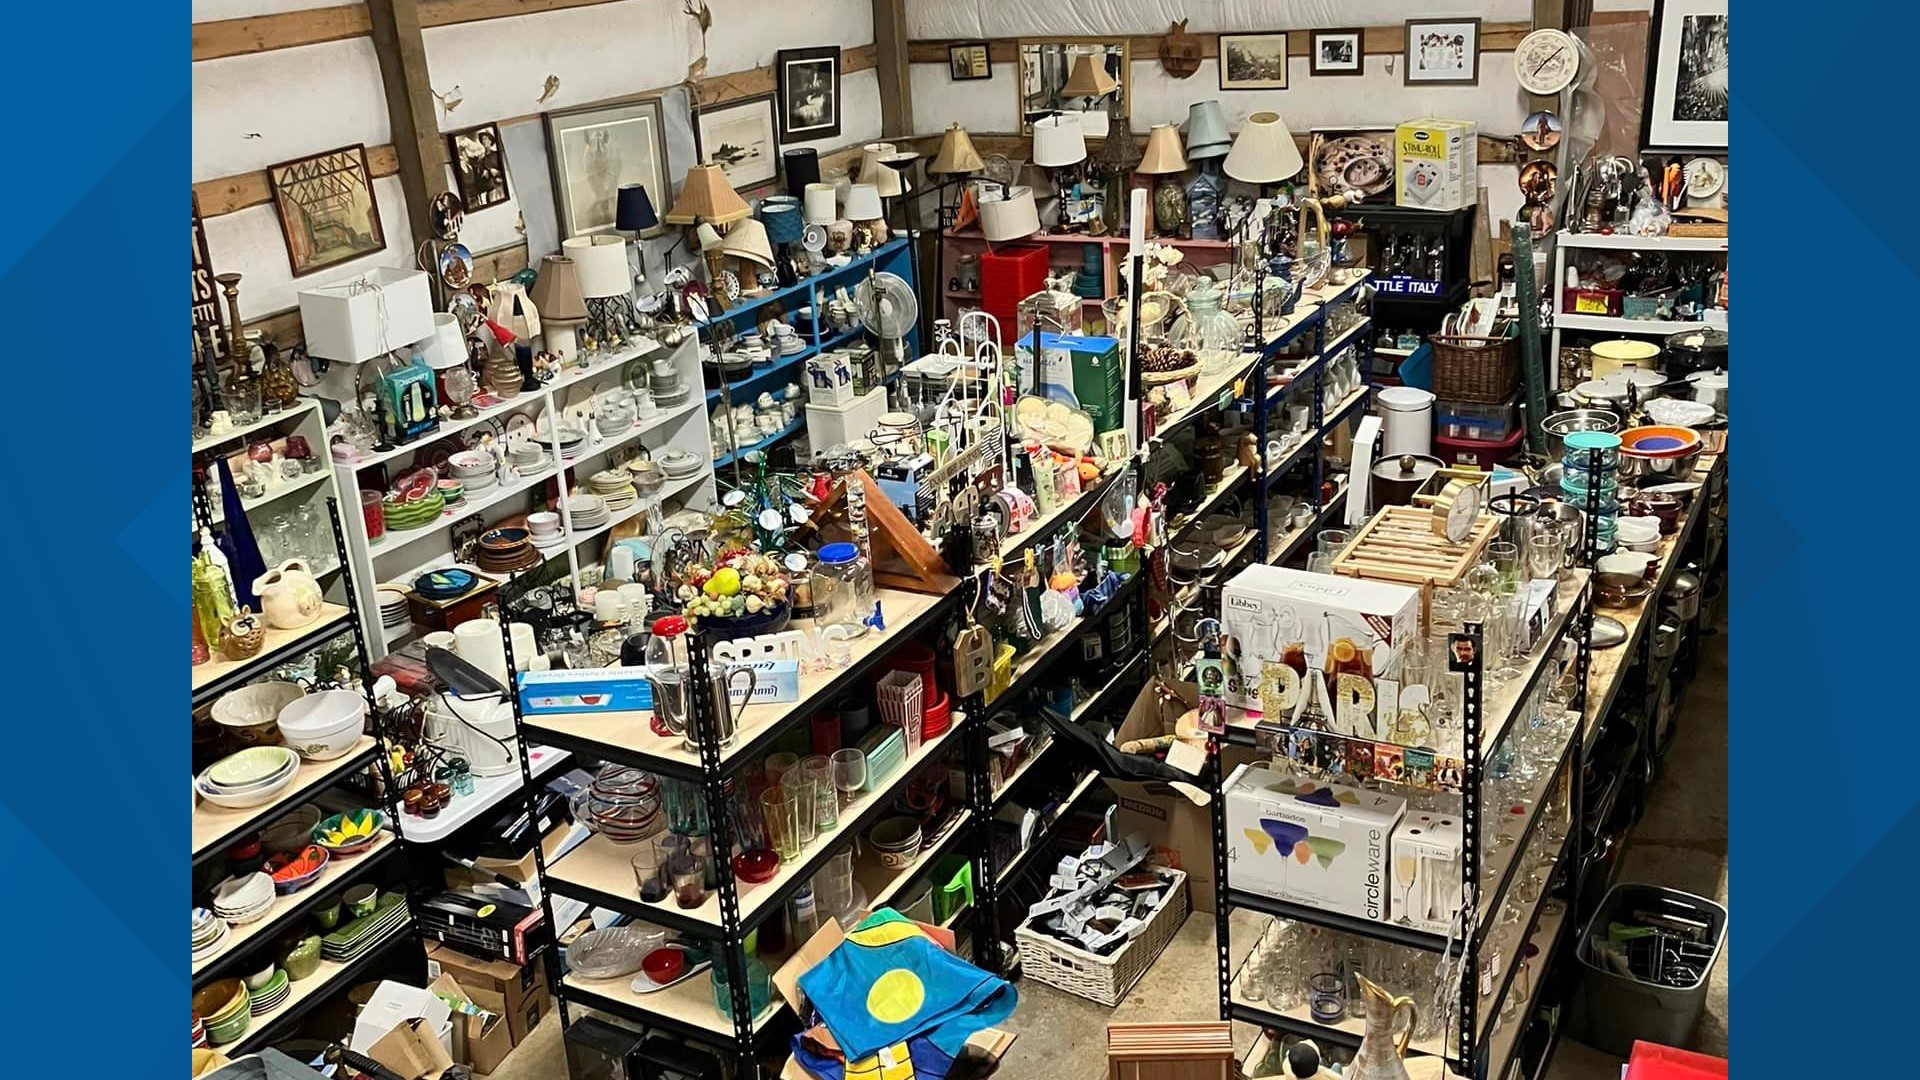 A group of volunteers will host its third yard sale fundraiser to support local nonprofits. The July 15-16 event will feature more than 7,000 items for sale.